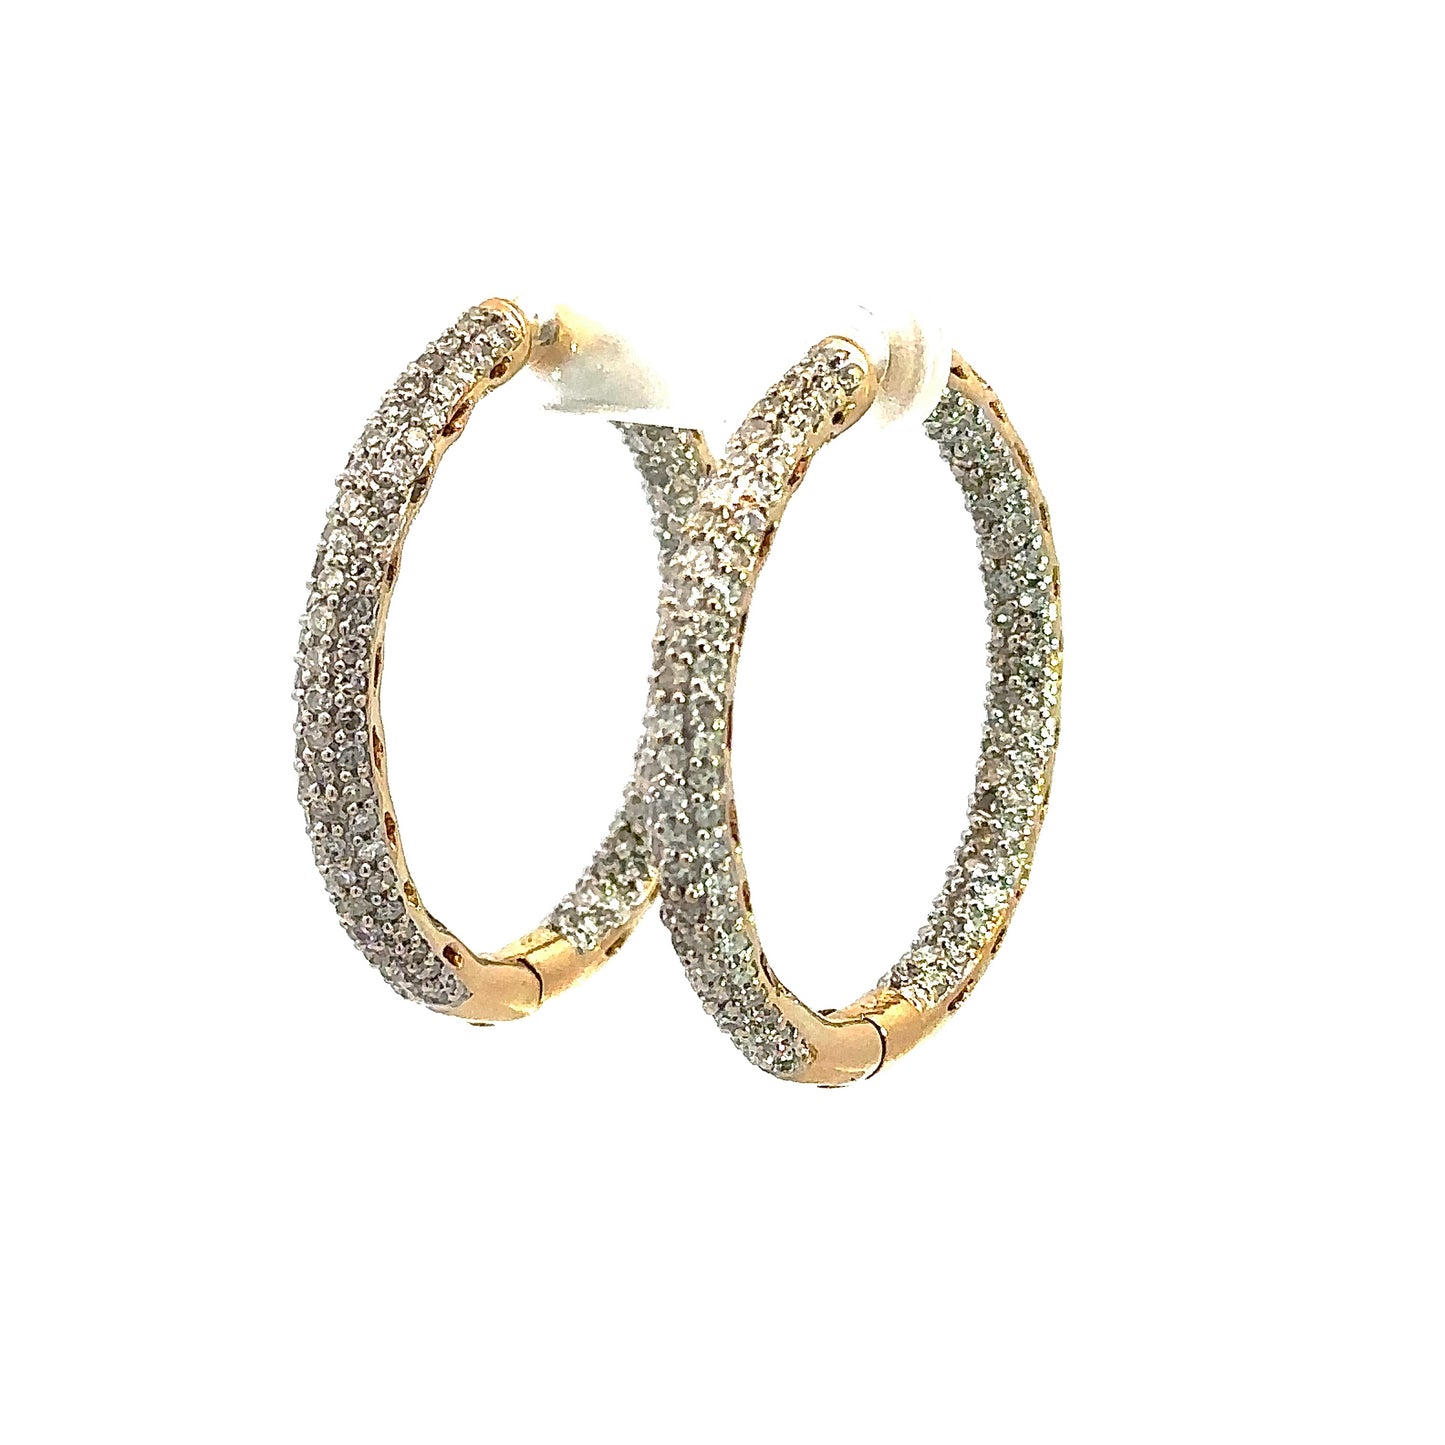 Diagonal view of diamond hoop earrings in yellow gold with 3 rows of round small diamonds outside on front and inside of hoops